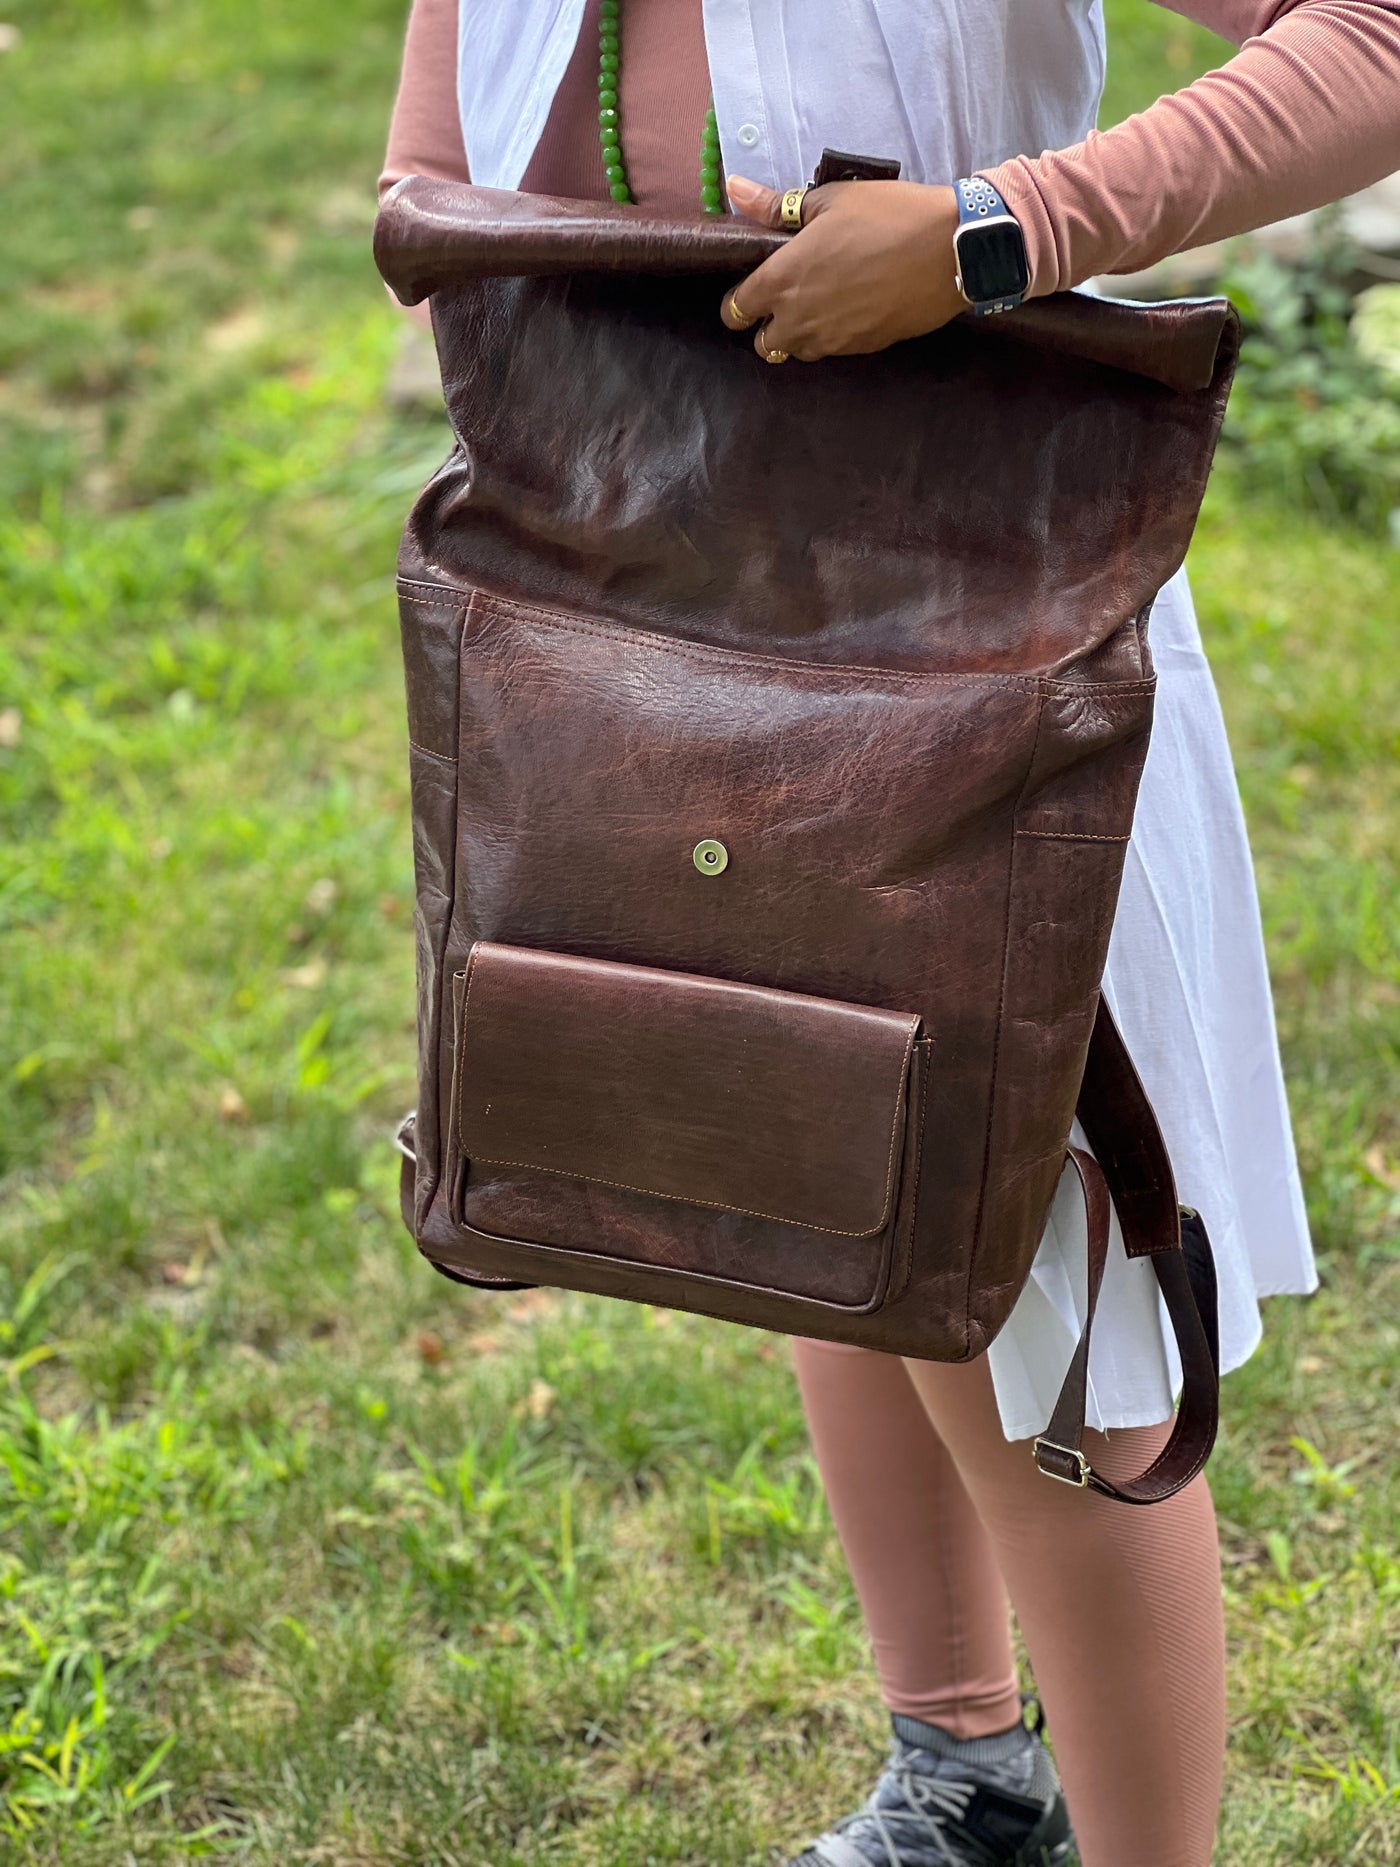 "Artisan-Crafted Full-Size Leather Backpack: A Taste of Mali's Heritage"